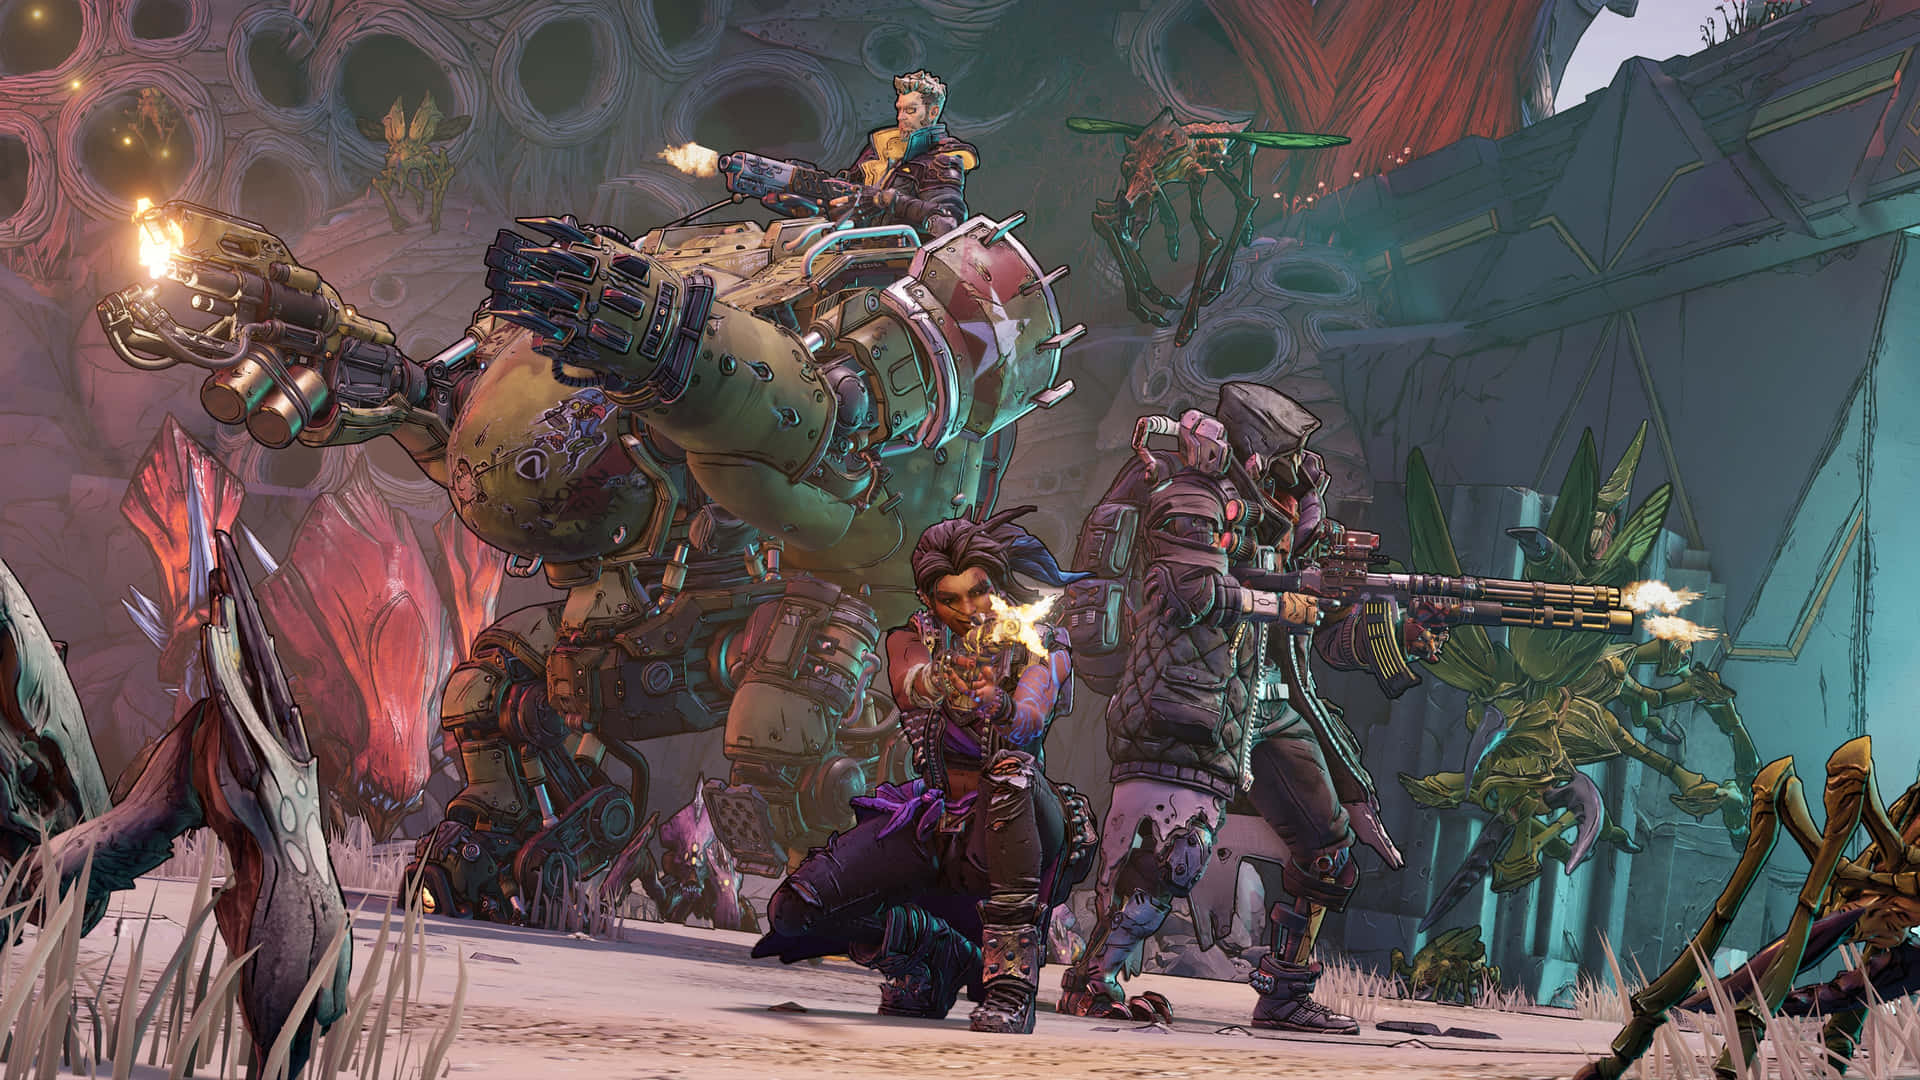 Step into the thrilling universe of Borderlands 3 with this mesmerizing 4K wallpaper